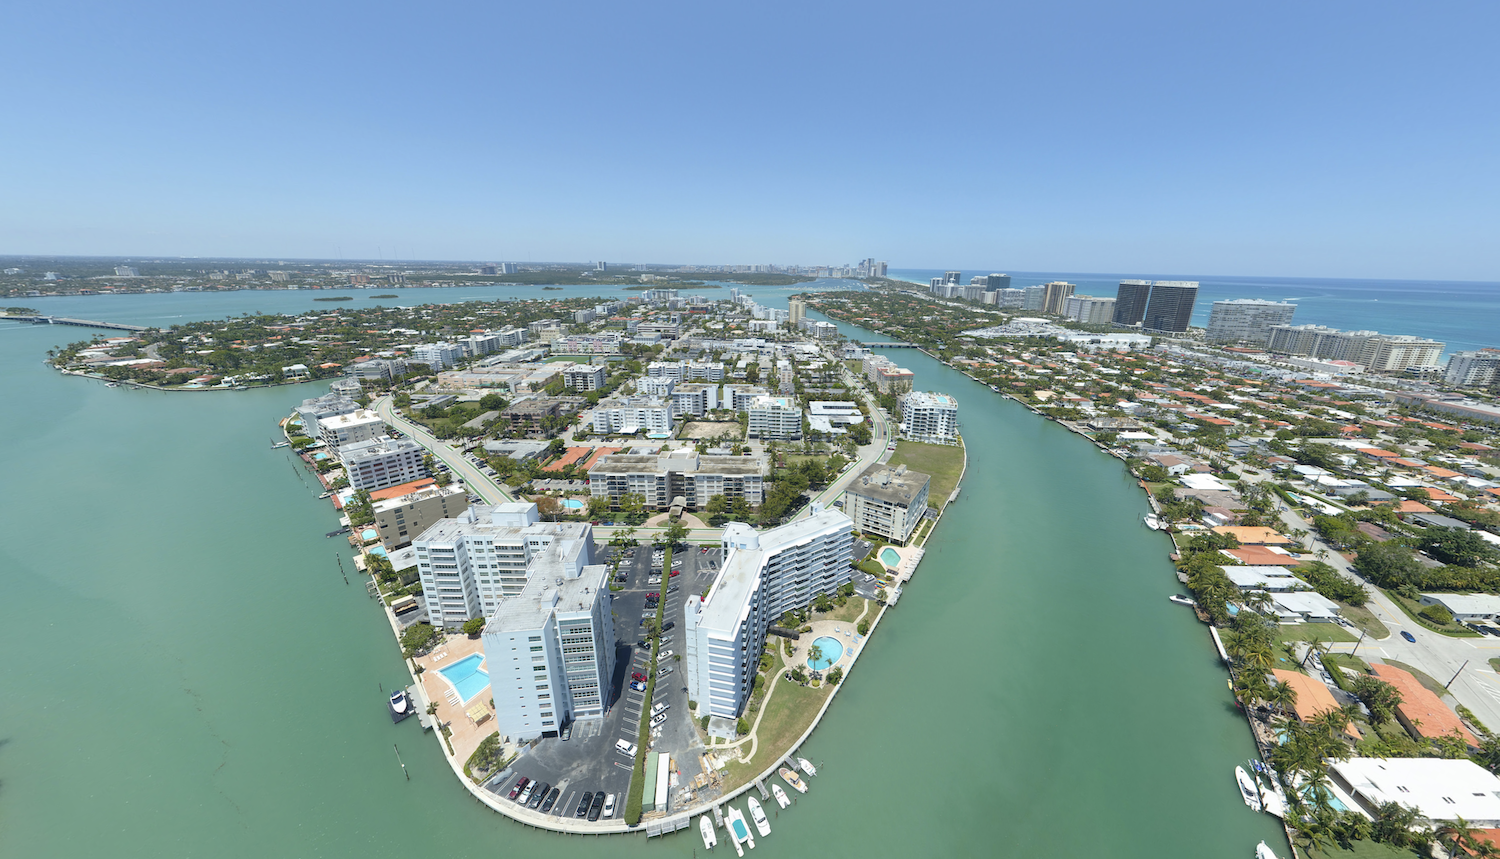 Aerial View of Bay Harbor Islands. Courtesy of Google Maps.